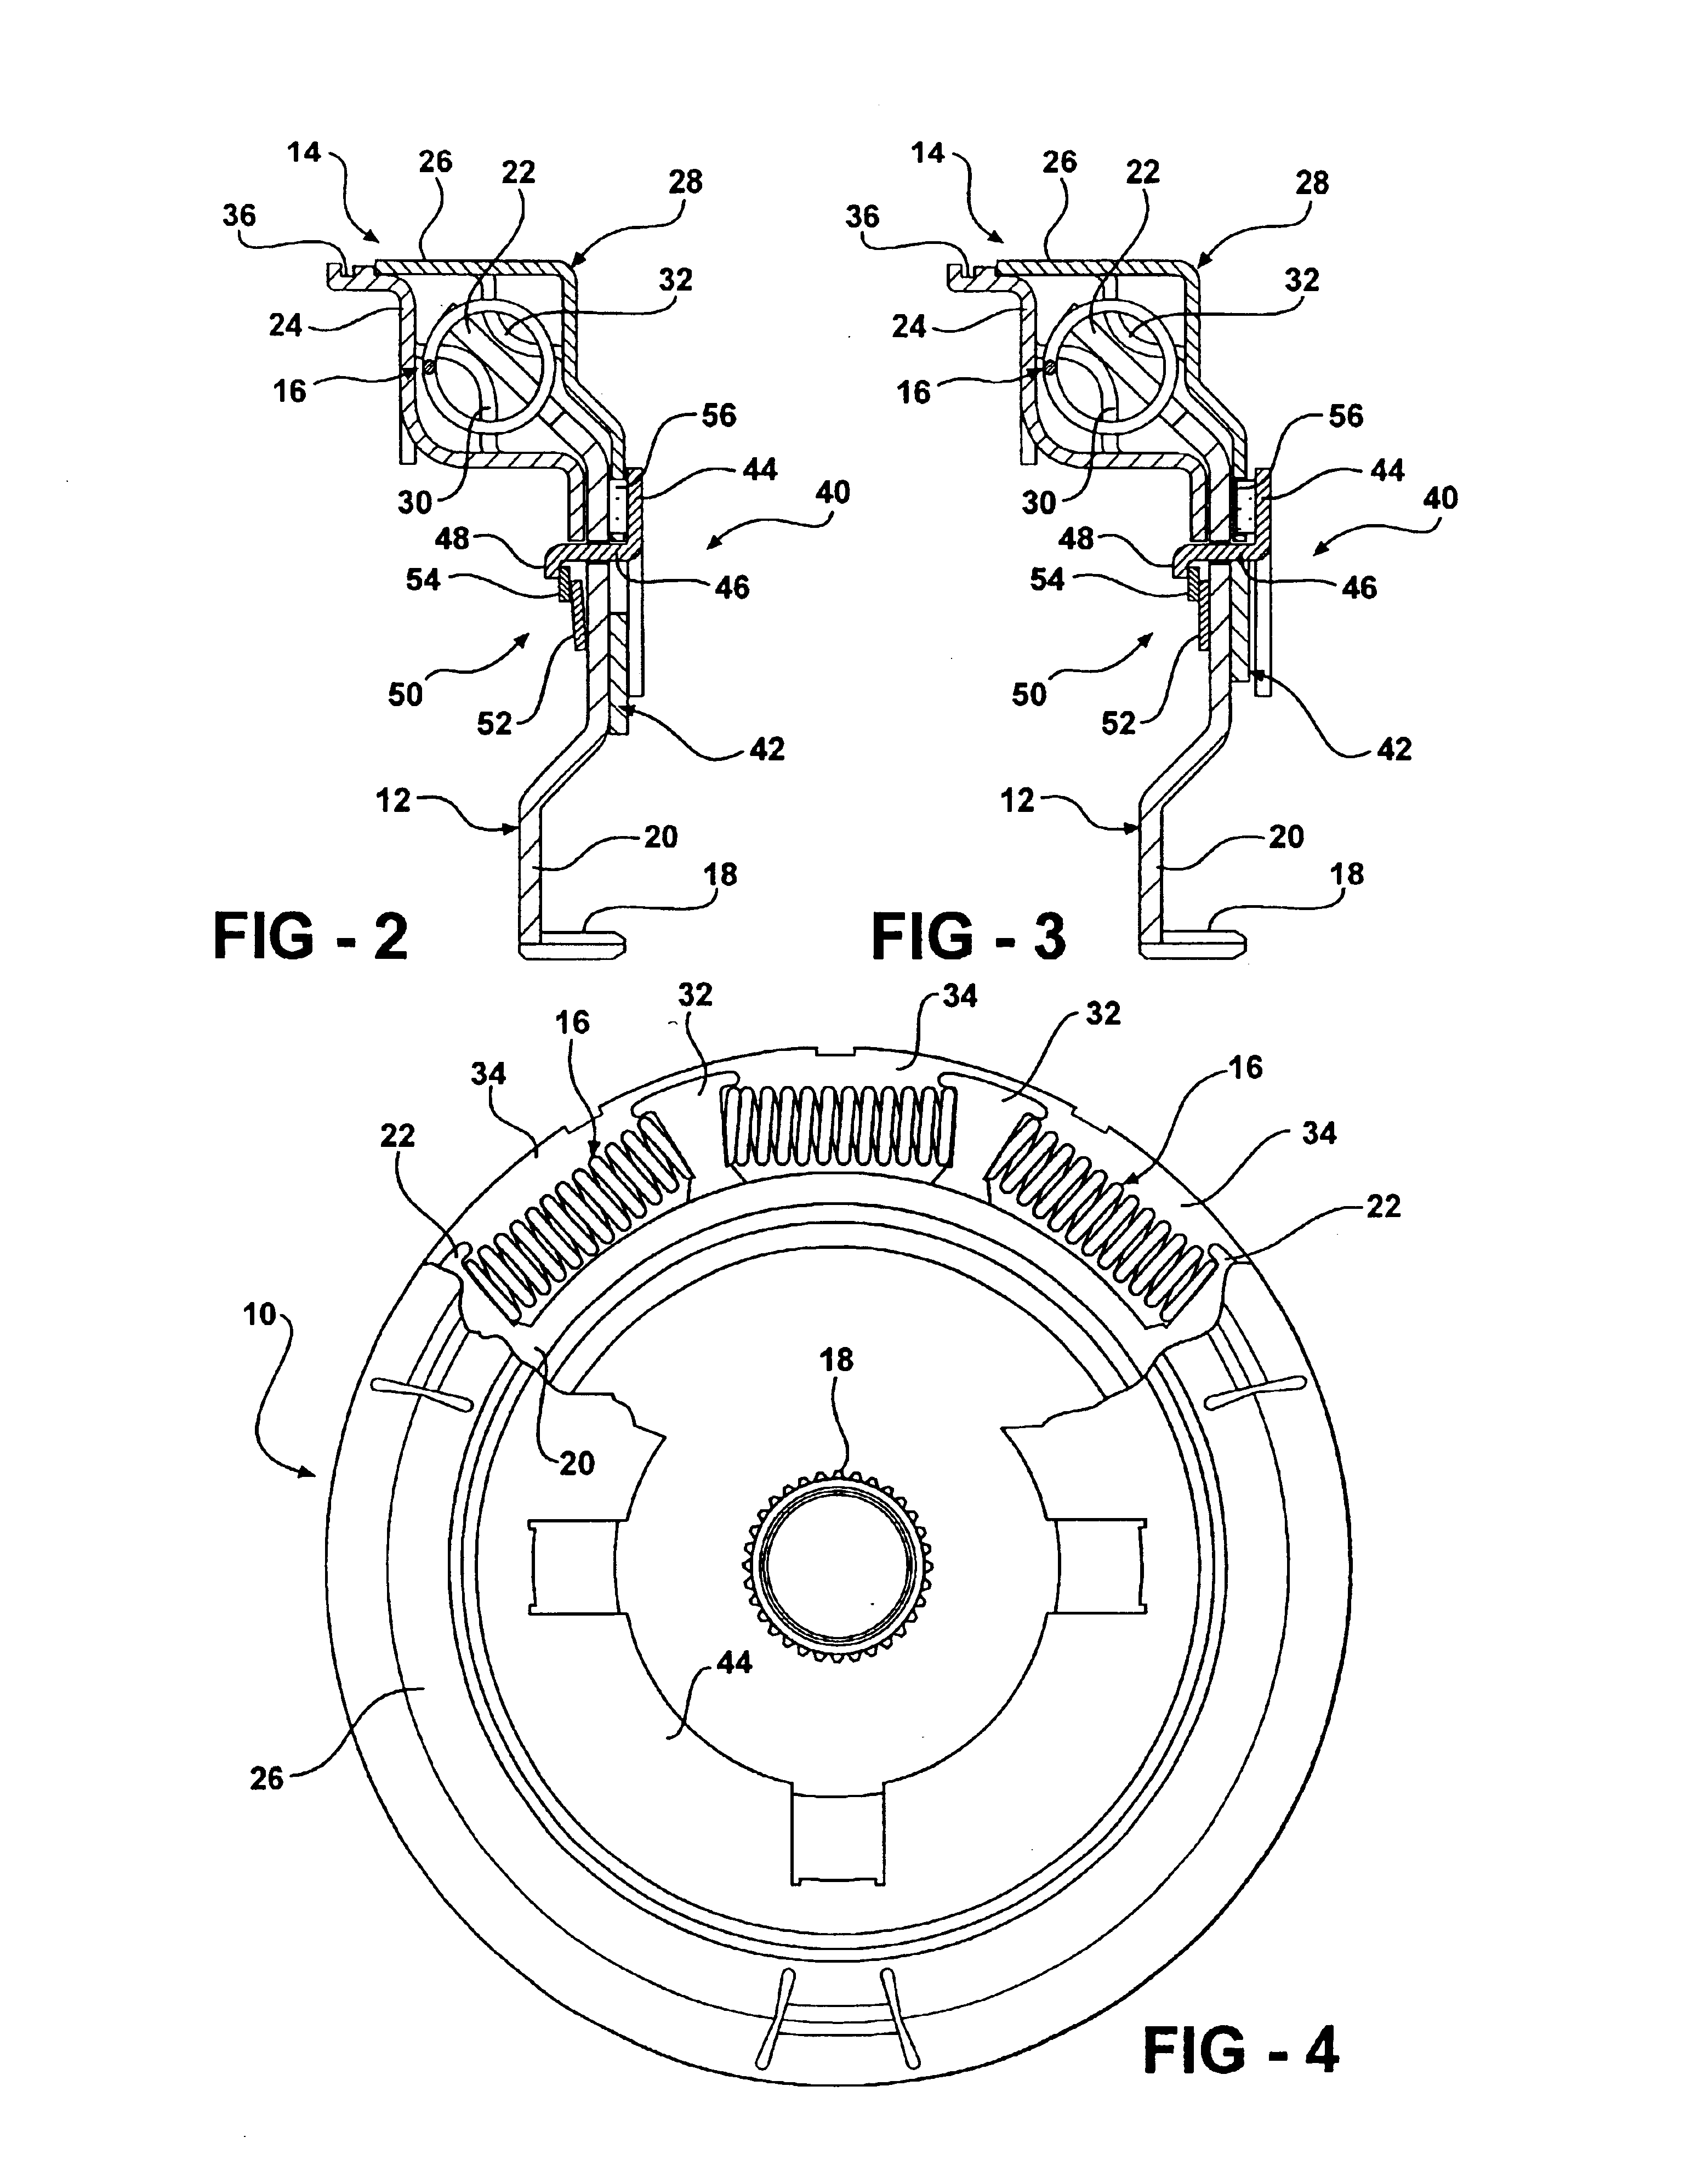 Torsional damper having variable bypass clutch with centrifugal release mechanism